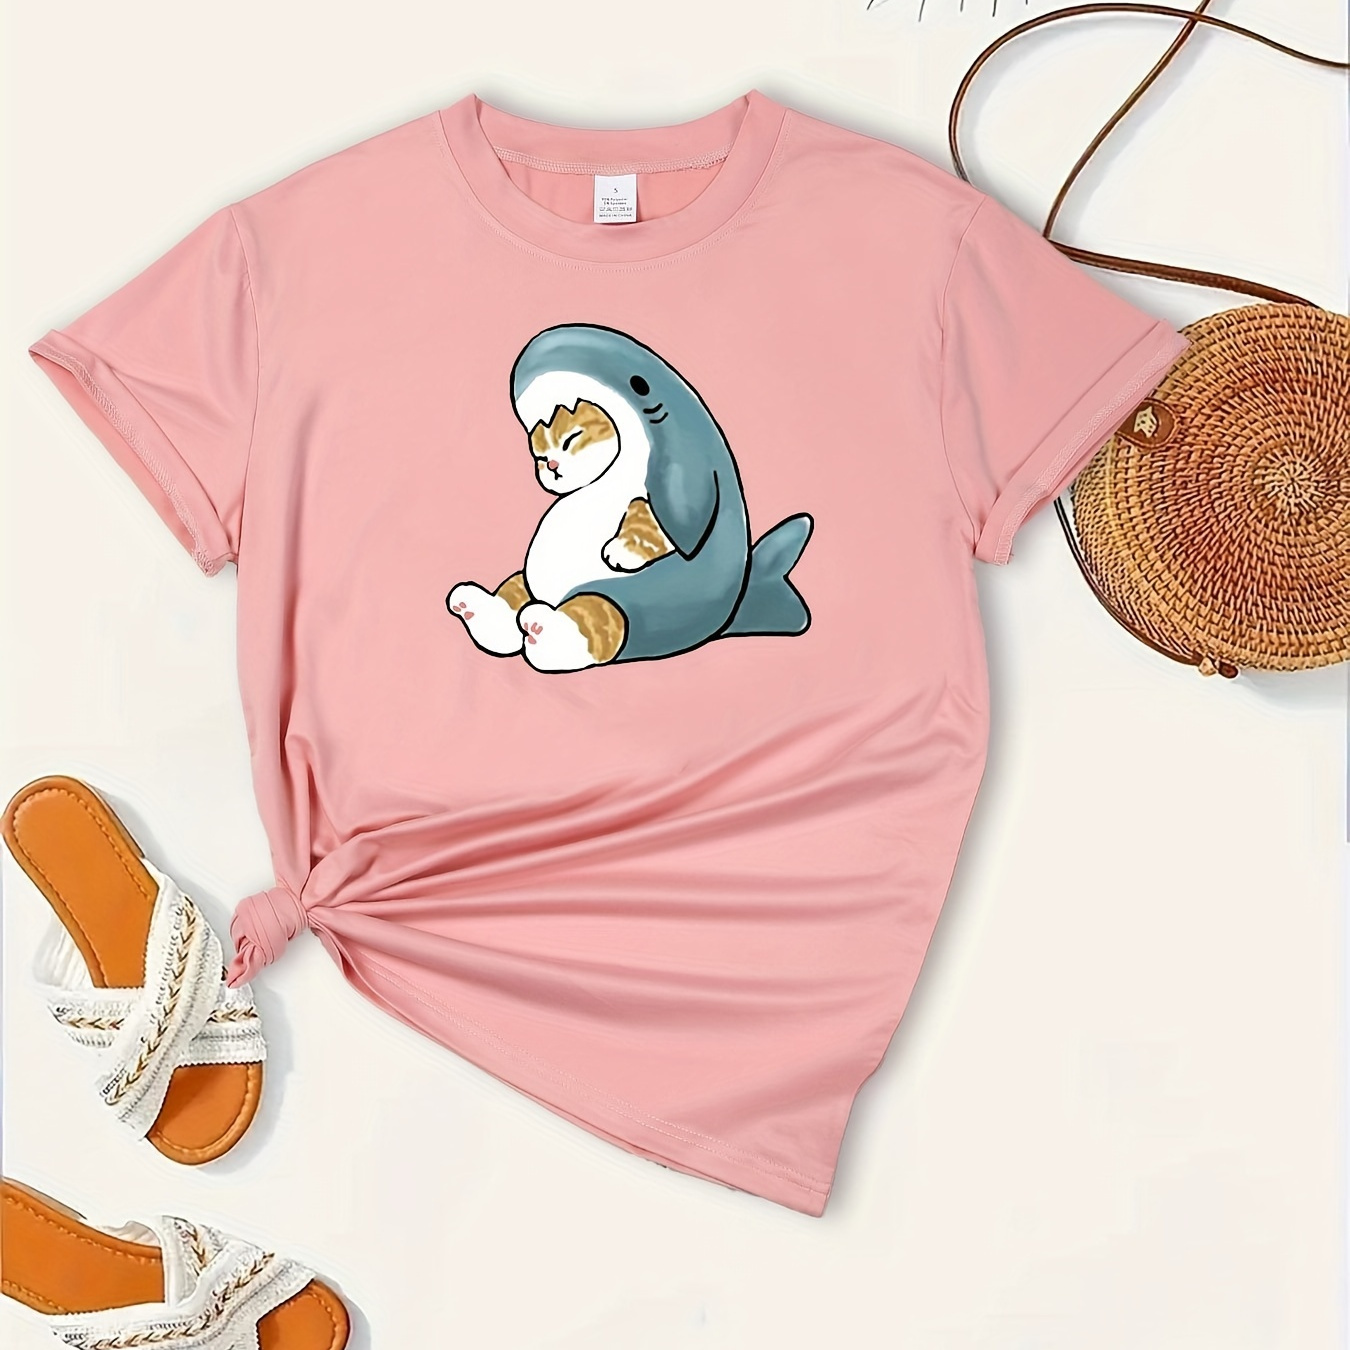 

Women's Casual Sports T-shirt With Shark And Cat Print, Various Colors Available, Comfort Fit, Short Sleeve, Round Neck Tee For Ladies